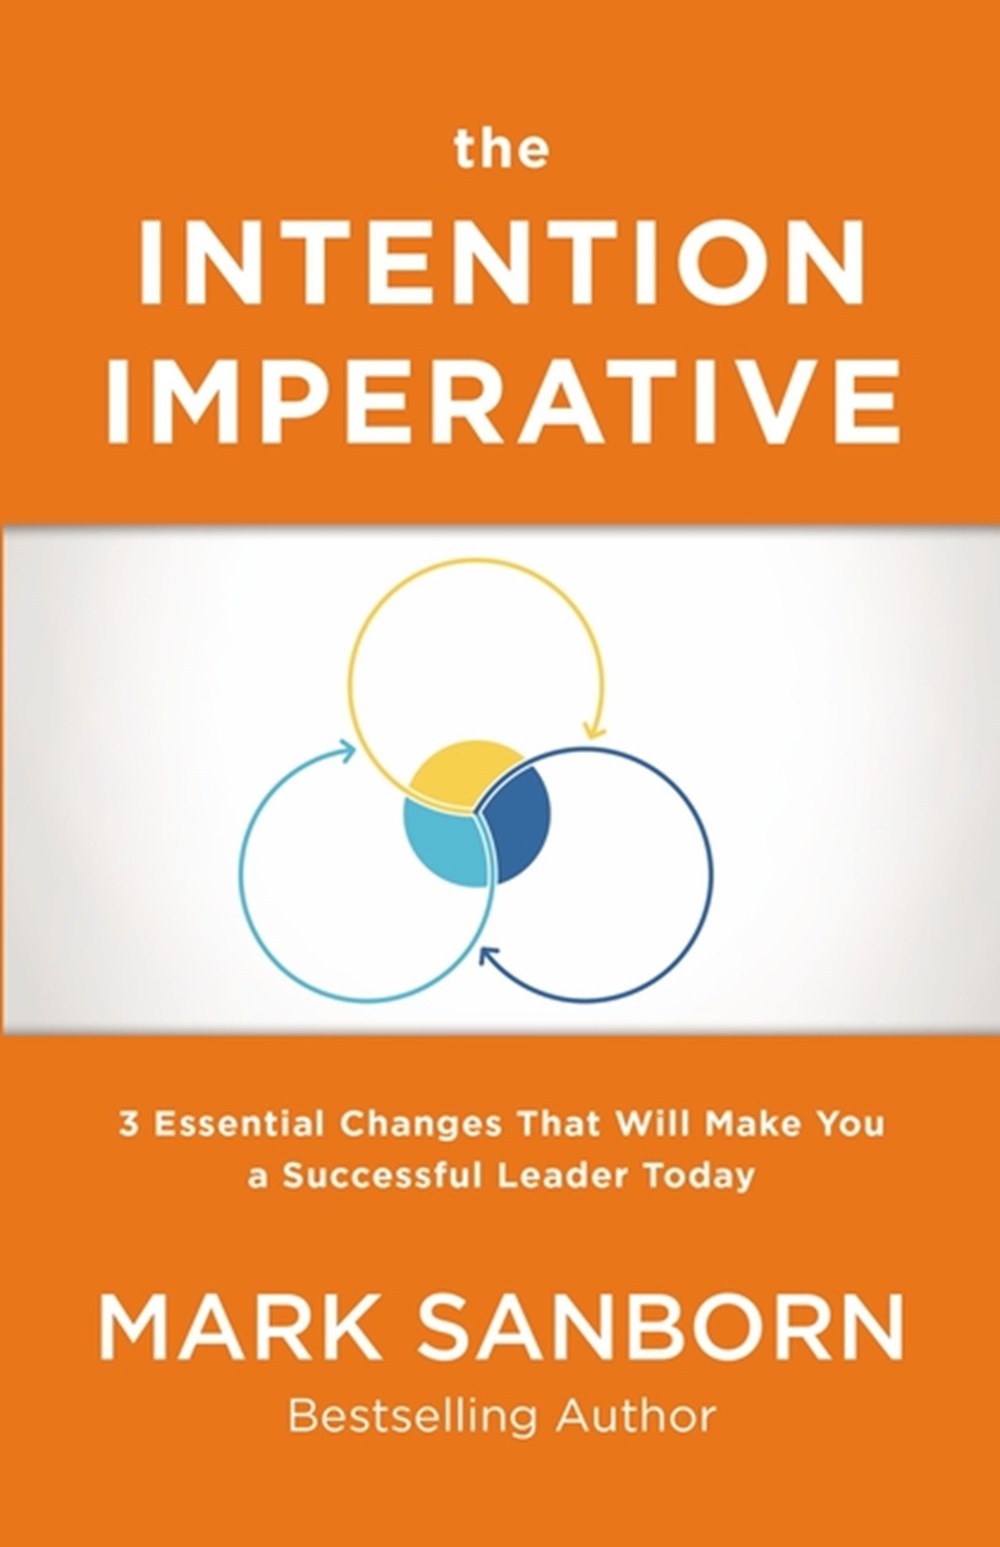 Intention Imperative: 3 Essential Changes That Will Make You a Successful Leader Today